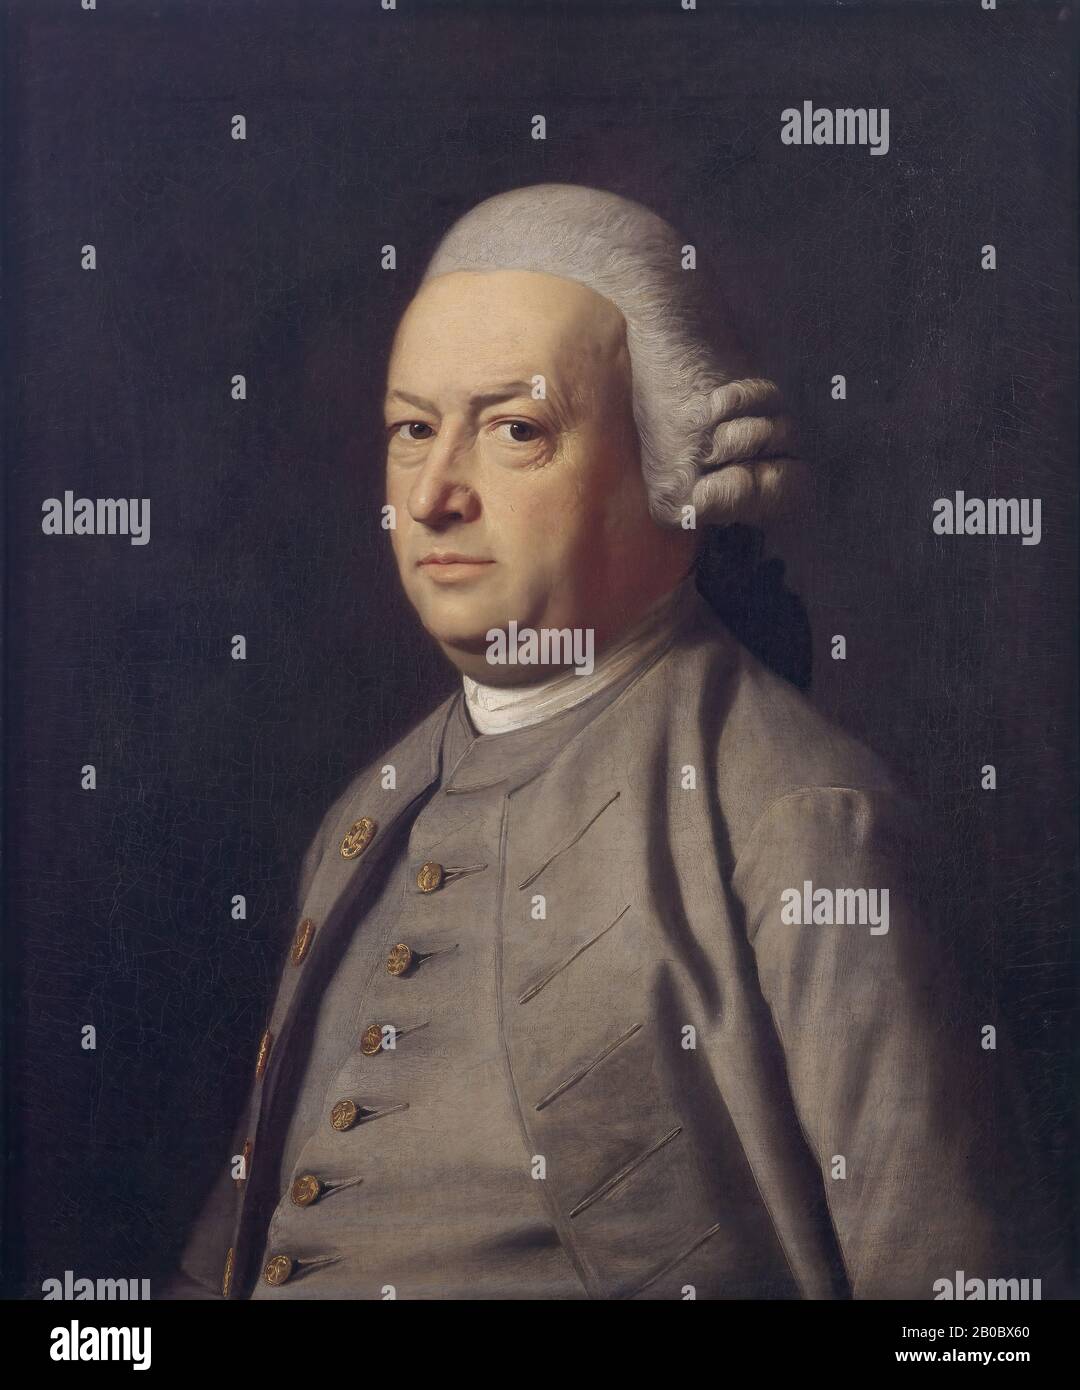 John Singleton Copley, Portrait of Thomas Flucker, ca. 1770-1771, oil on canvas, 28 1/16 in. x 24 1/4 in. (71.28 cm x 61.6 cm), This painting is considered the most physically and psychologically striking colonial portrait at Bowdoin, Thomas Flucker was an important political figure in late eighteenth-century Boston. A Tory, he fled to England in 1775. It has been suggested that the painting's somber palette and empty background (without the traditional attributes which situate the sitter in society) may allude to the gathering storm clouds and upheavals which would culminate in the American R Stock Photo